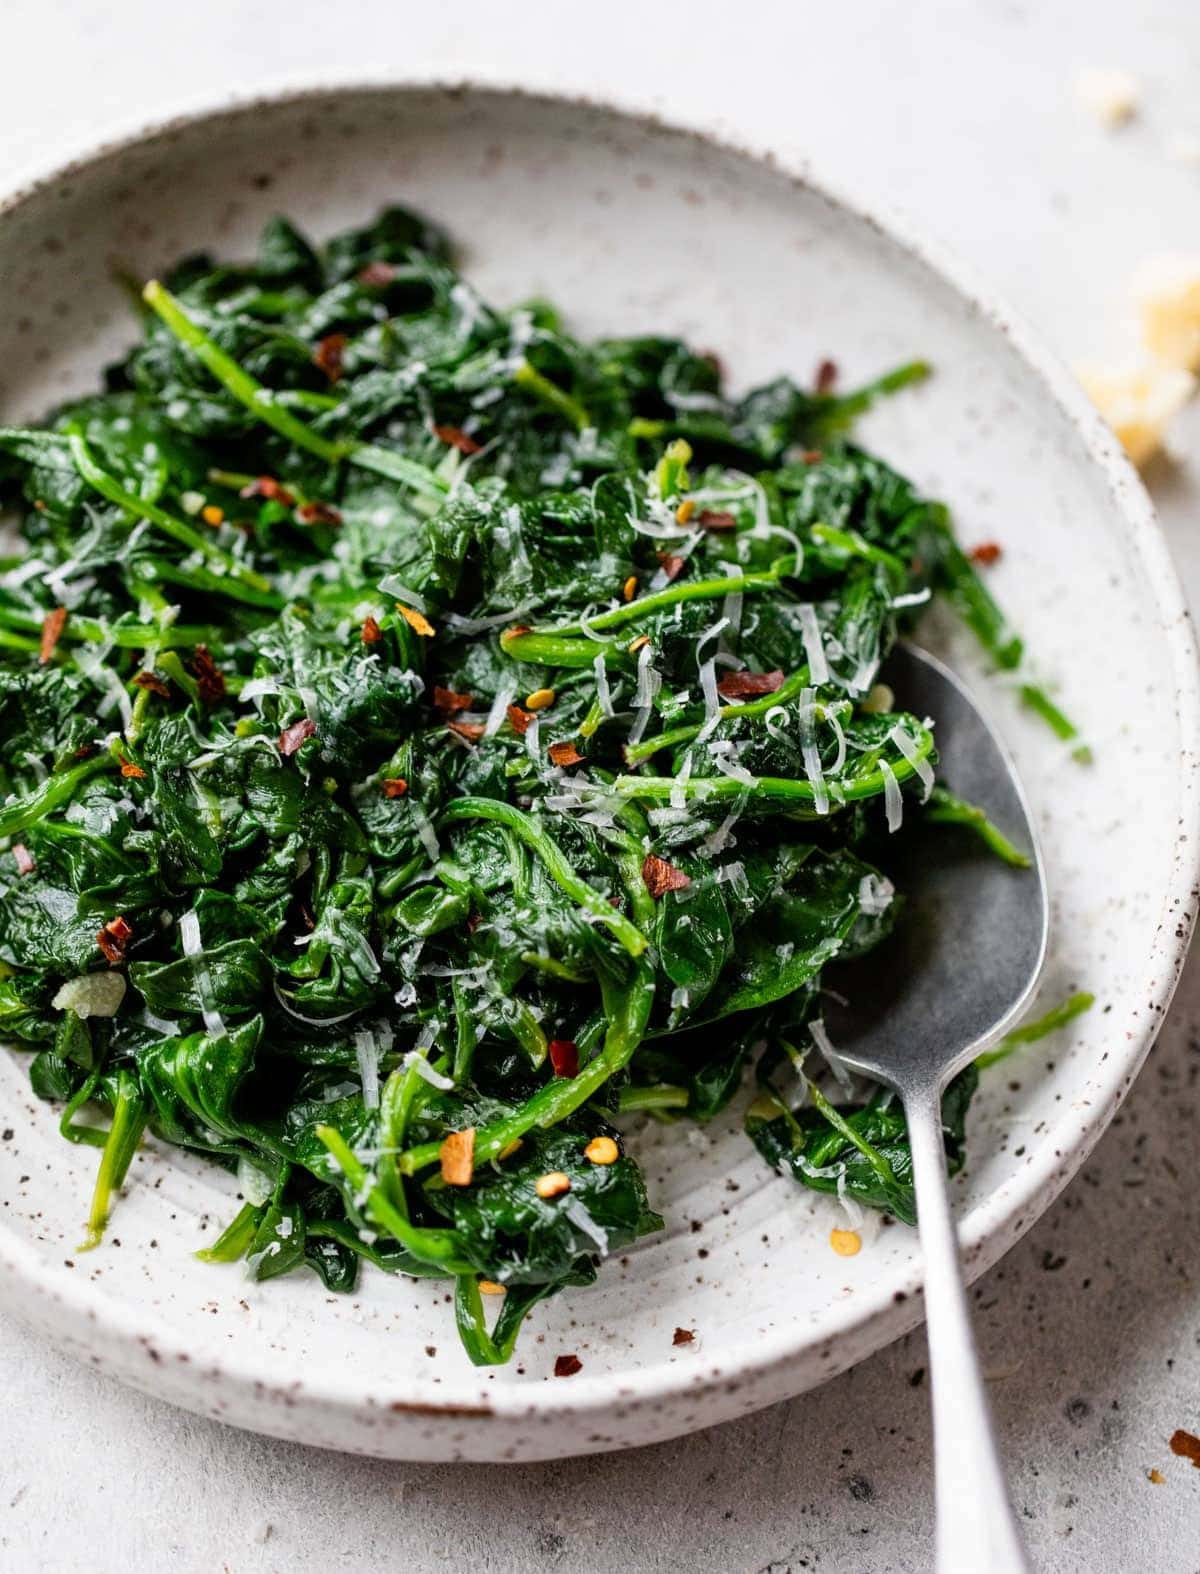 Sauteed spinach on plate.